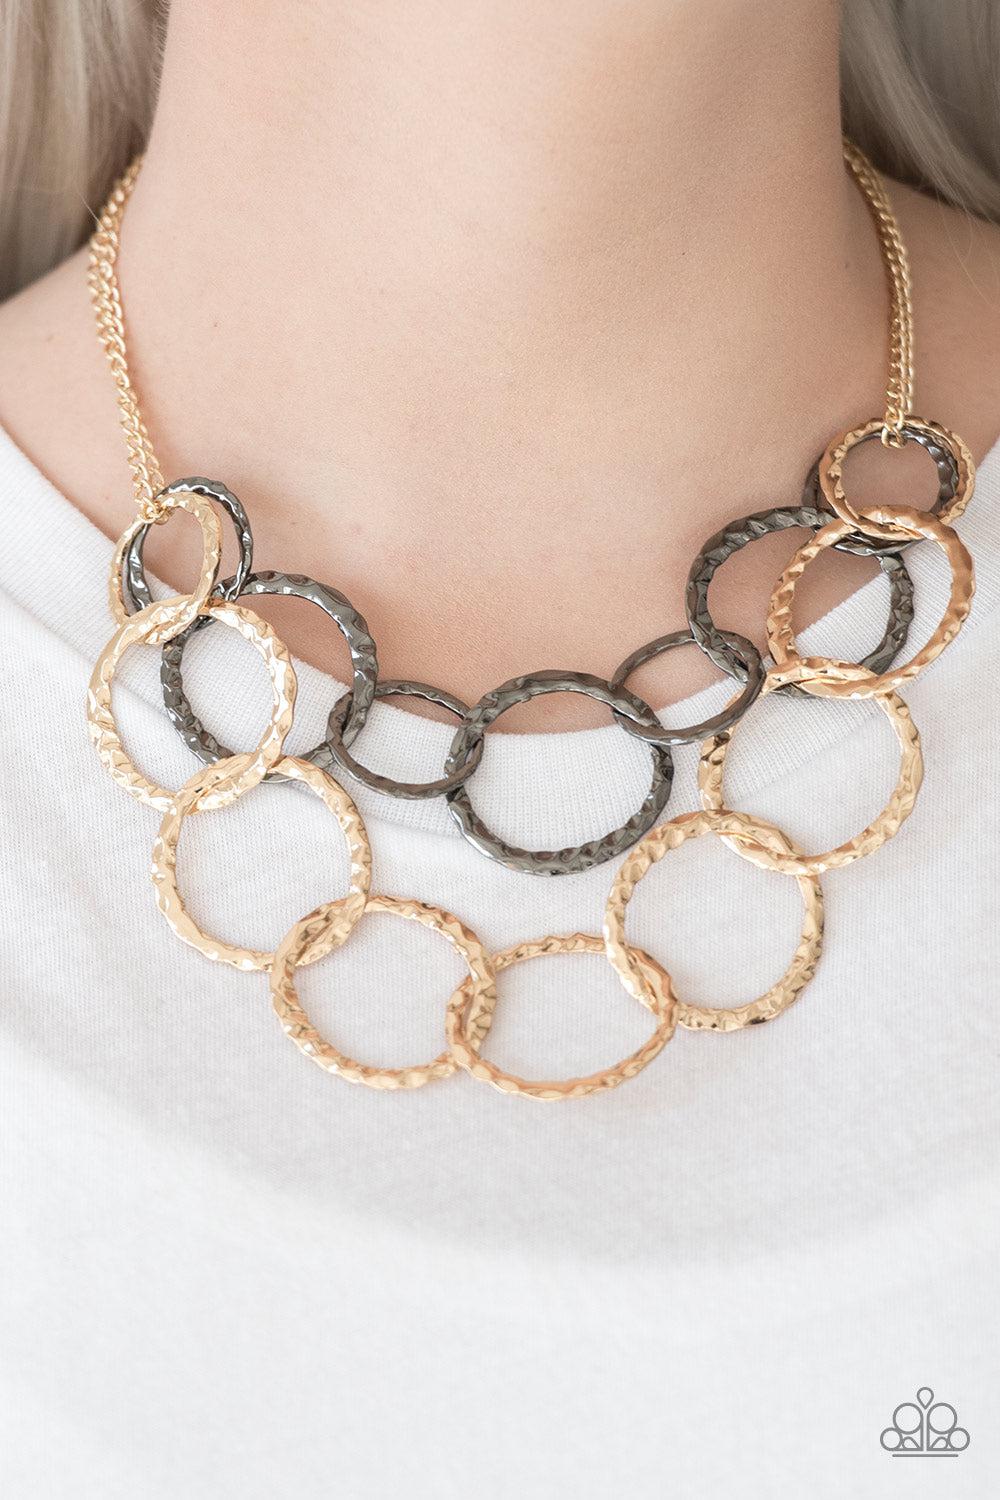 Radiant Ringmaster Multi Gold & Gunmetal Necklace - Paparazzi Accessories- lightbox - CarasShop.com - $5 Jewelry by Cara Jewels